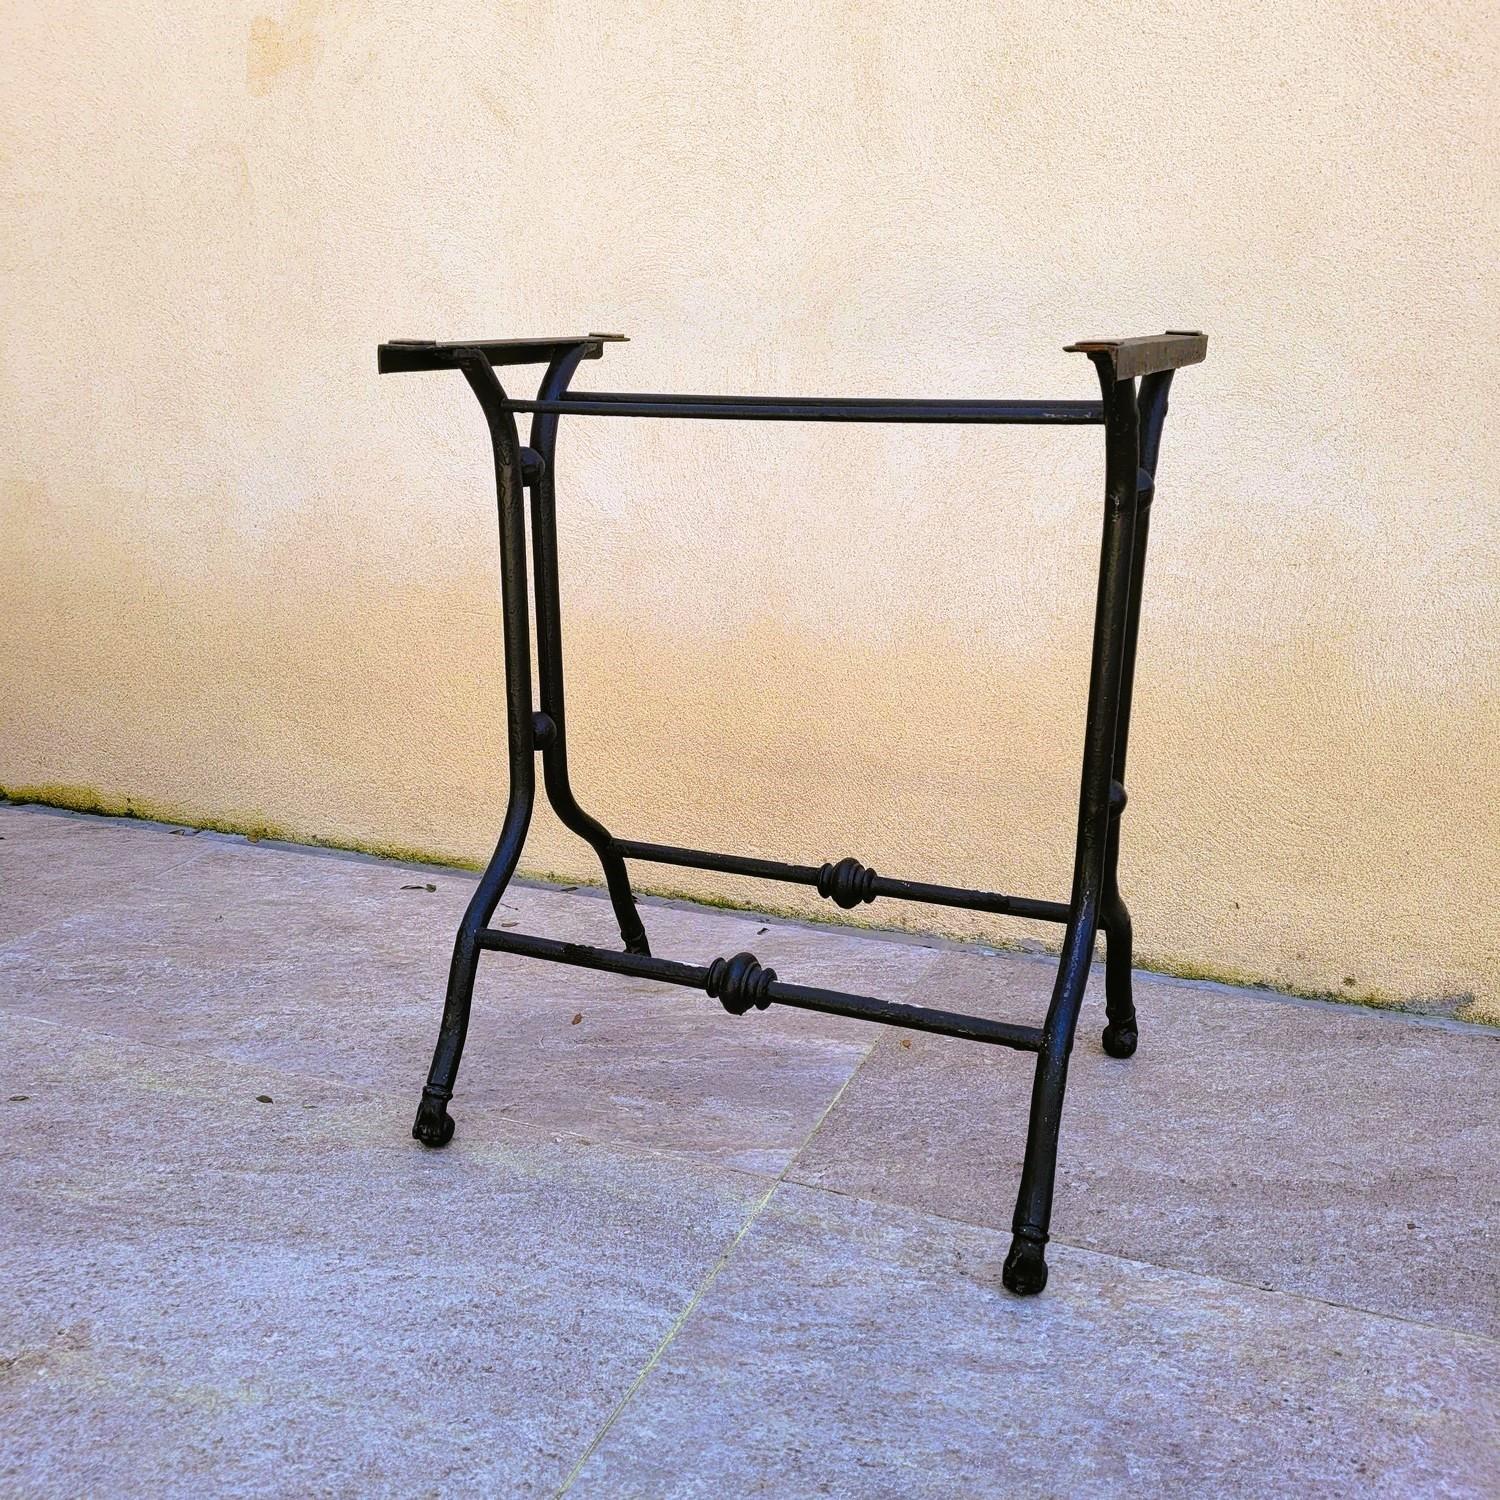 Garden Table, Stone And Iron, Late 19th Century
Garden table with a riveted iron base painted black and a very beautiful natural stone top (probably Lucerne stone)

Late 19th century
Patina of time

Height 83.5cm
128 x 70 cm